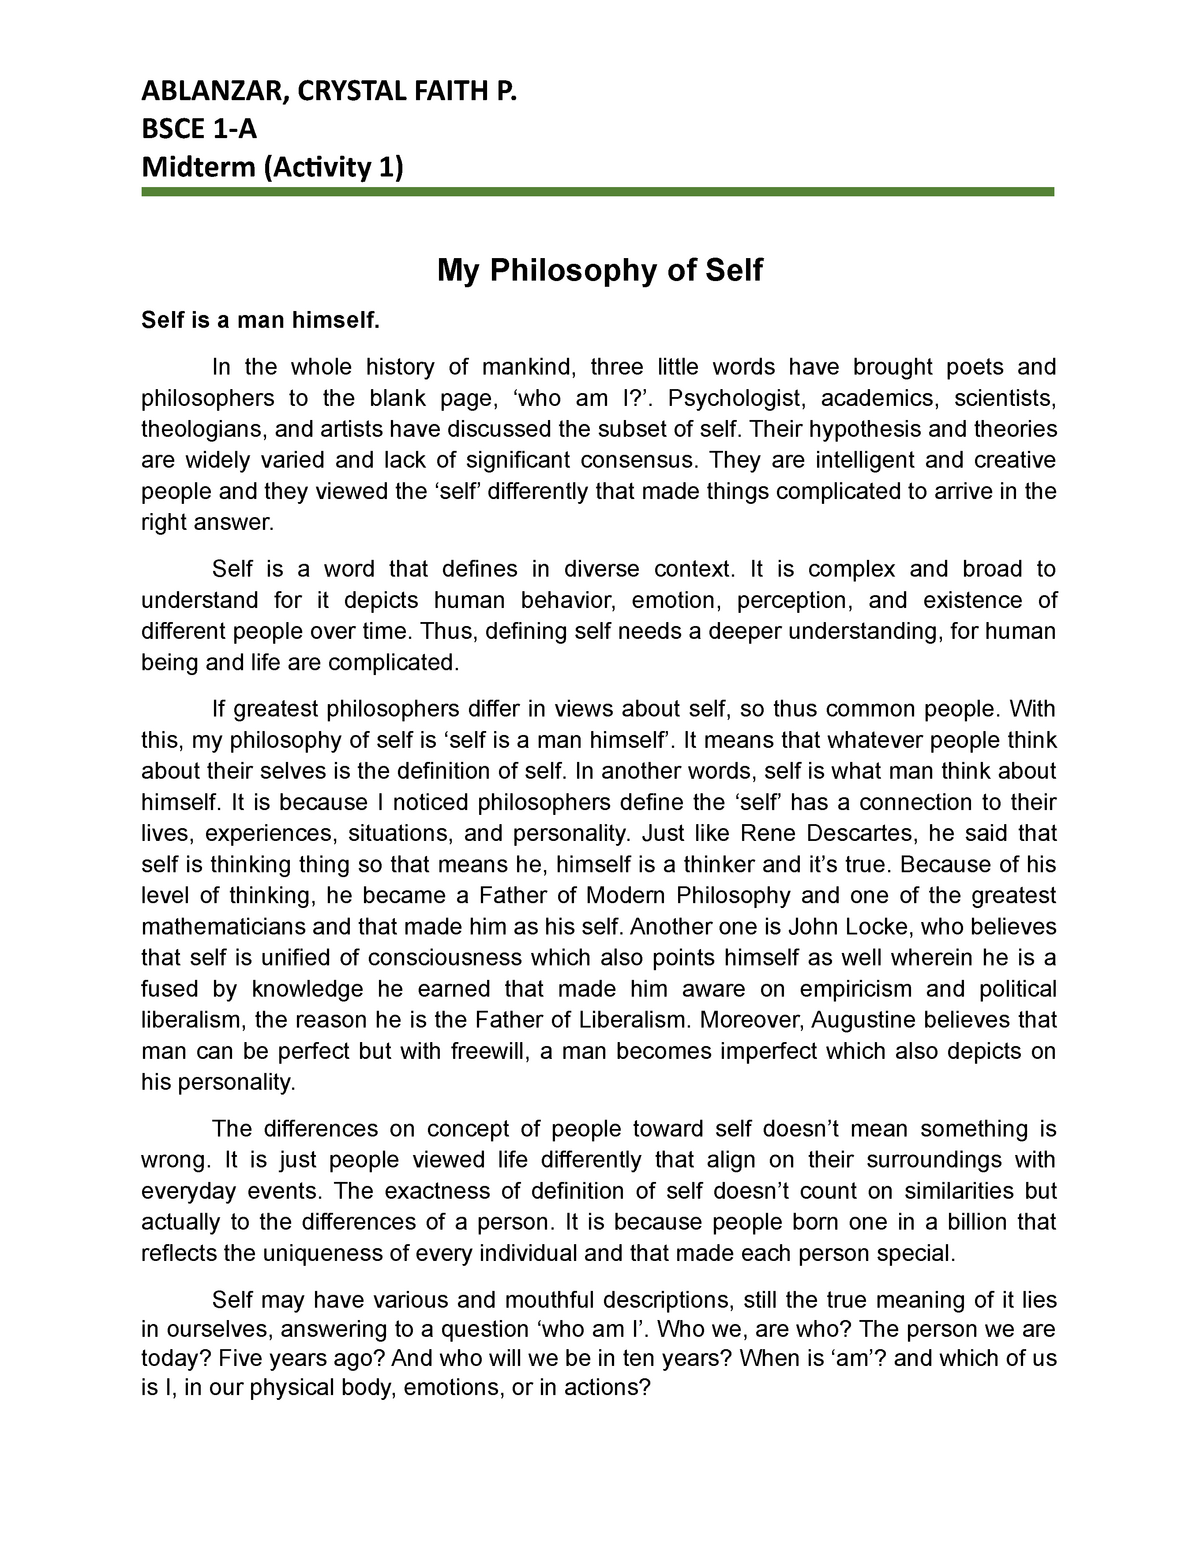 philosophical essay about the self